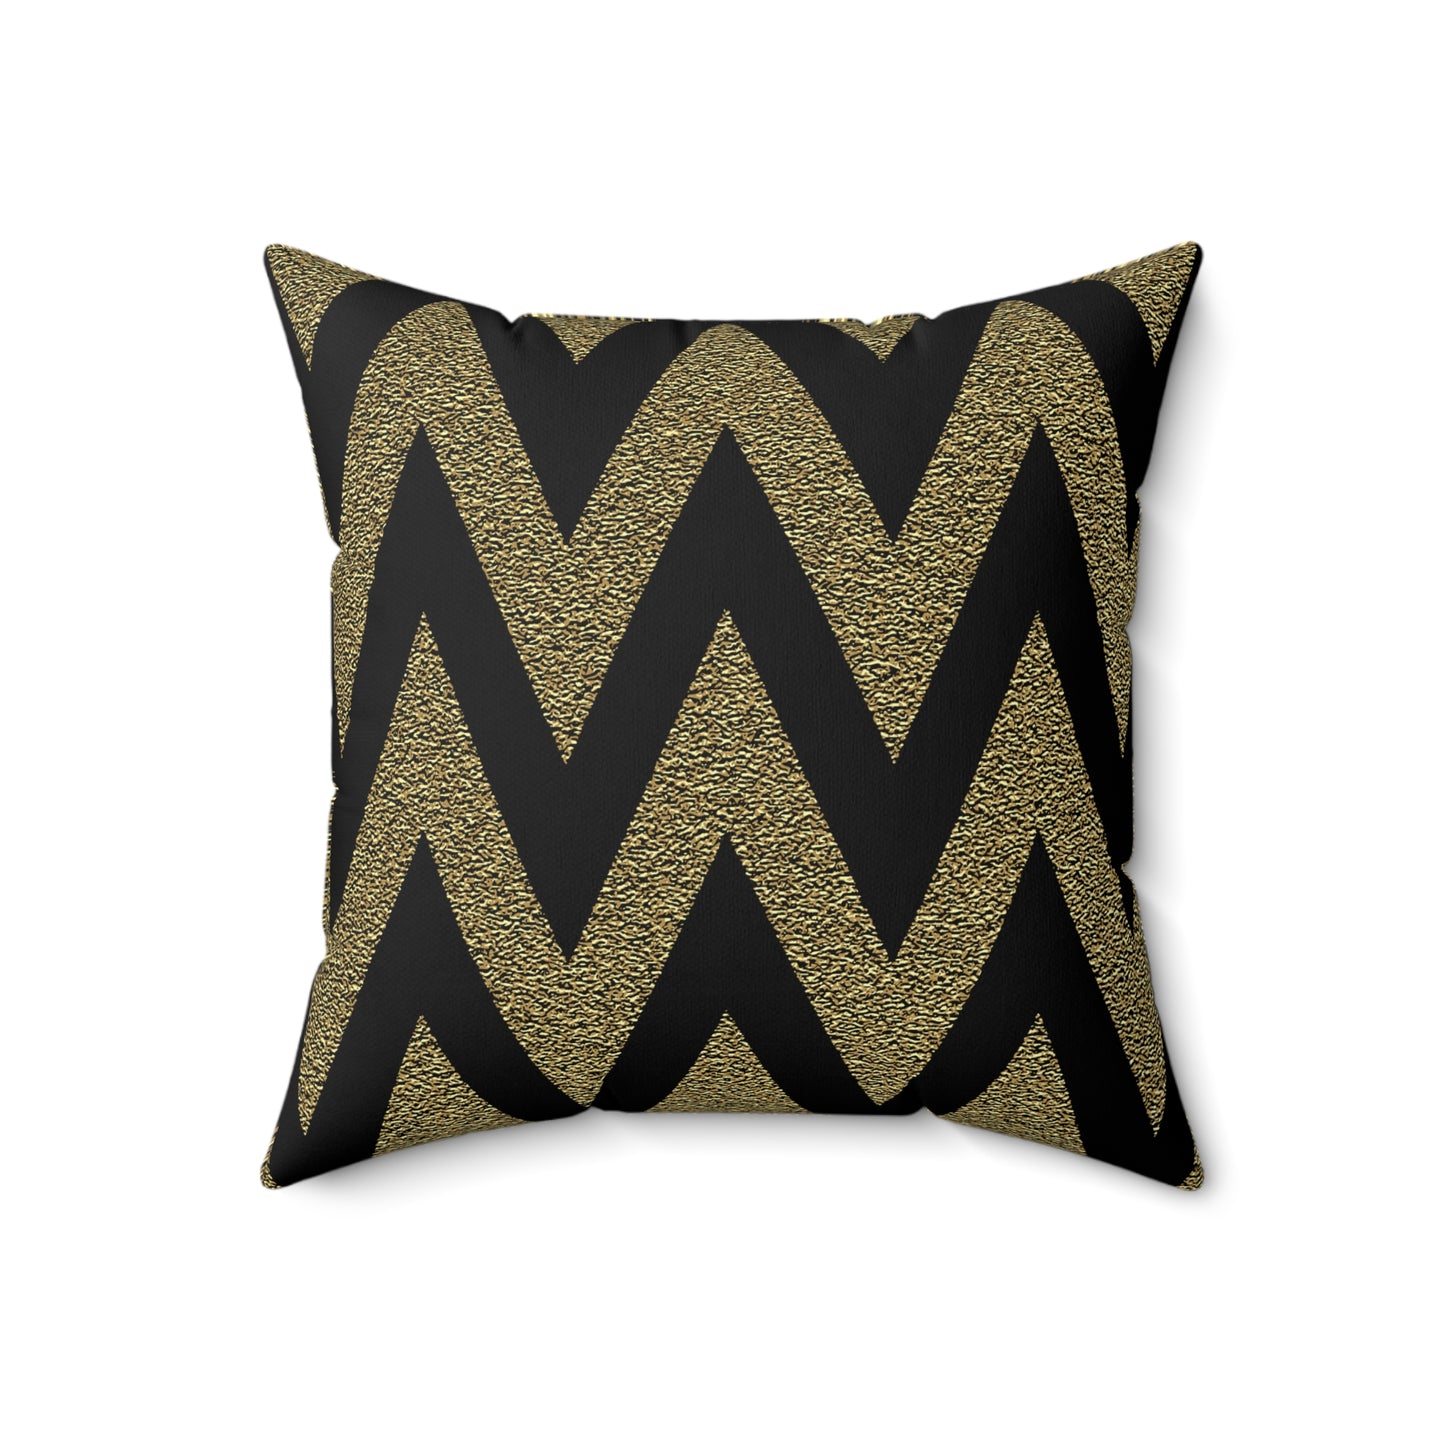 Black and Gold Zig Zag Throw Pillow